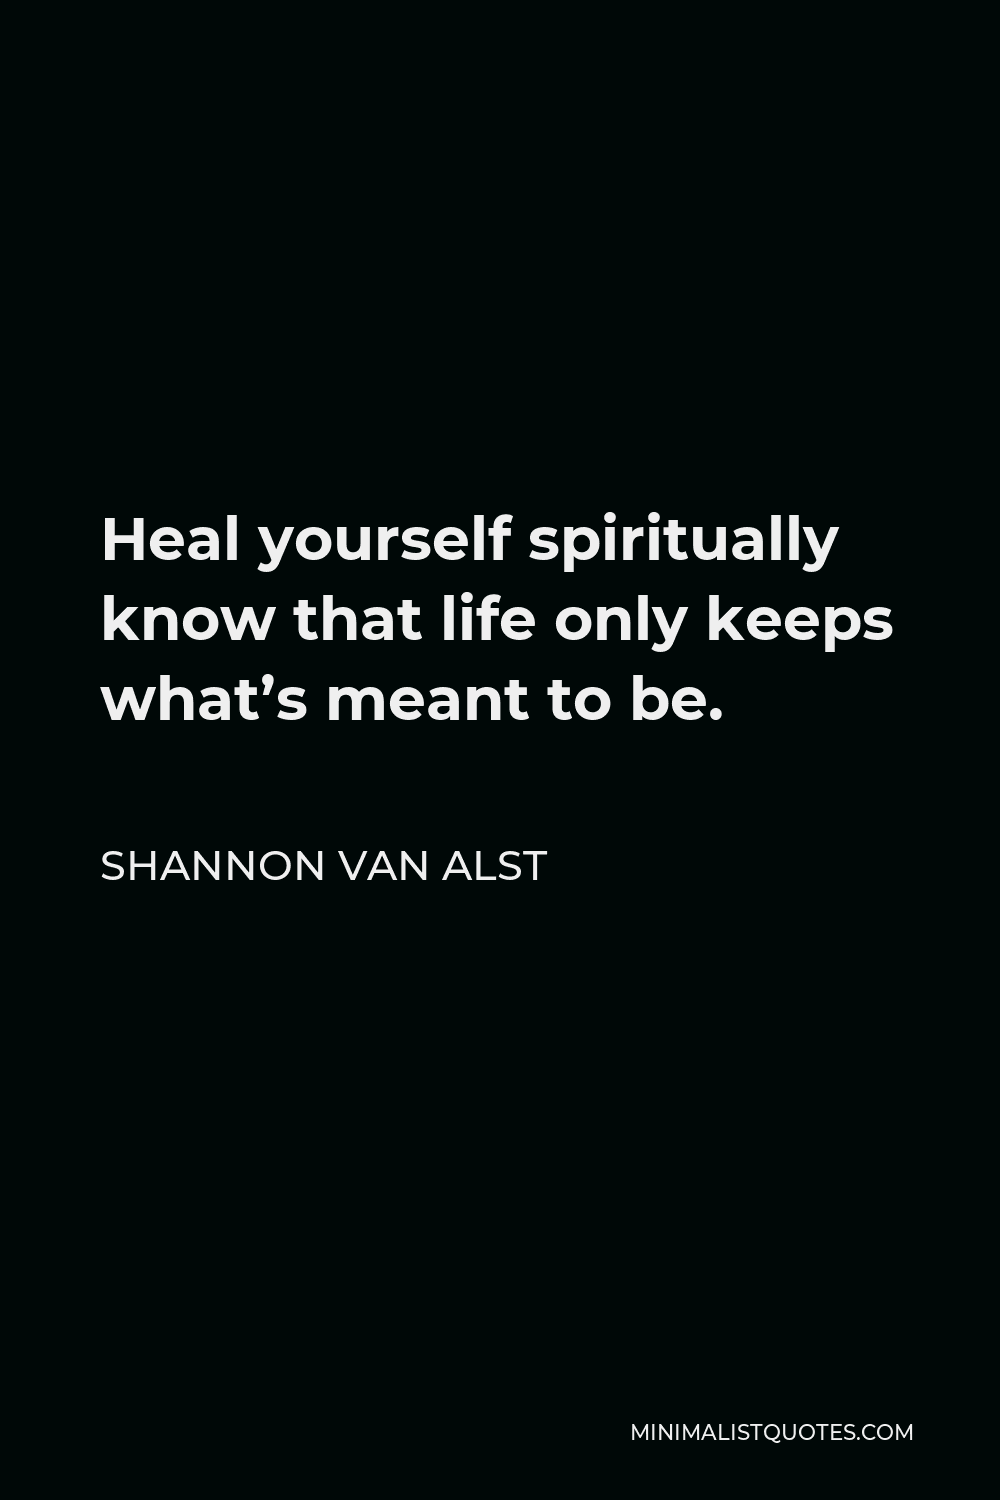 Shannon Van Alst Quote - Heal yourself spiritually know that life only keeps what’s meant to be.